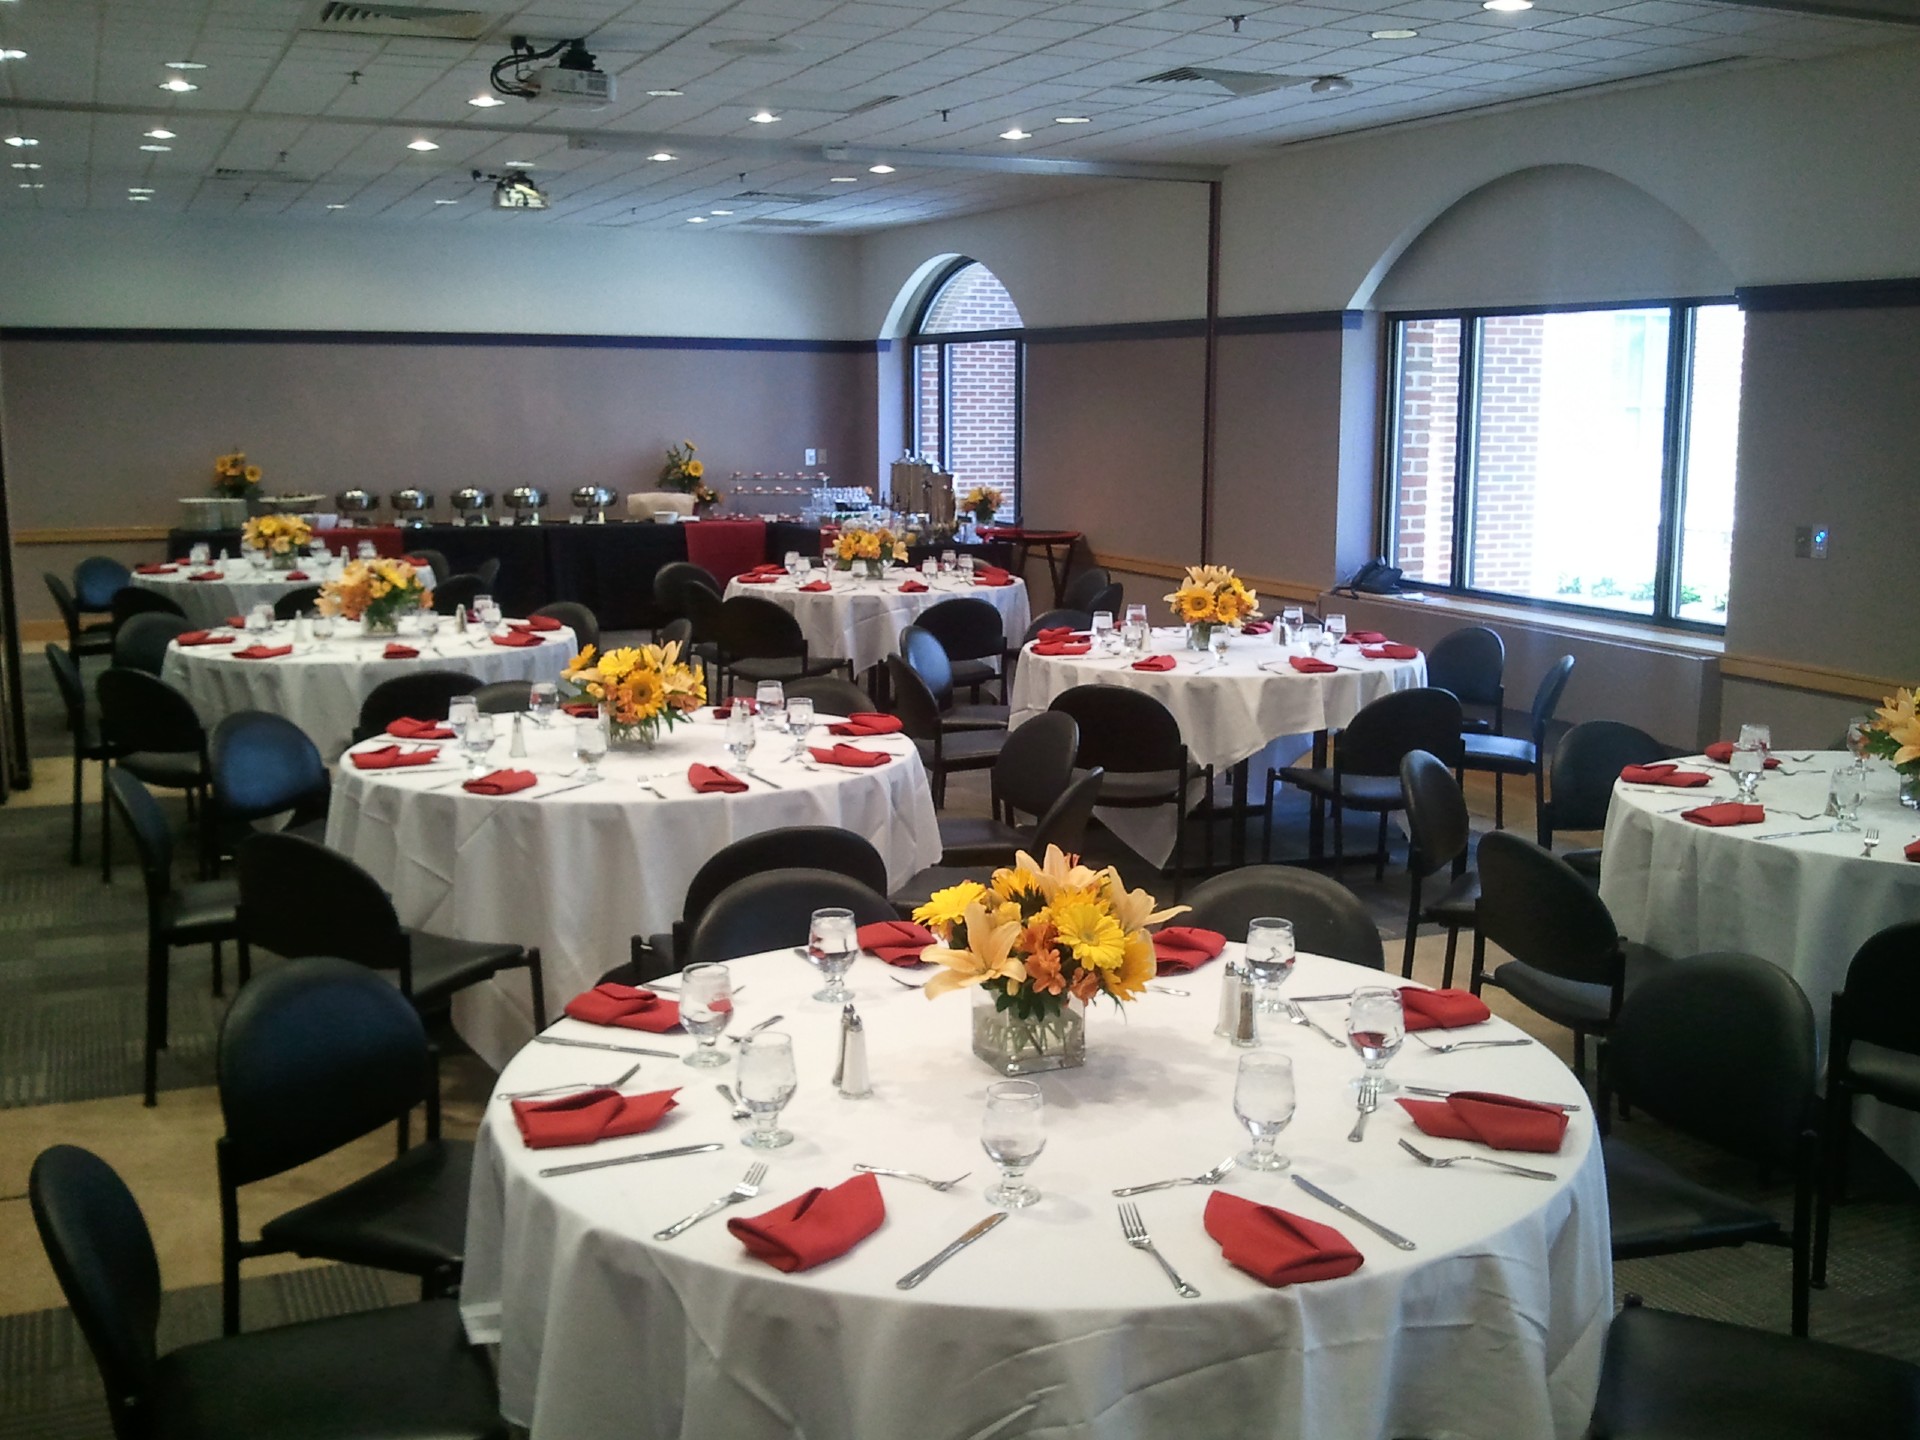 Muhlenberg's Conference and Event Services can help business and organizations find venues to host events on campus.